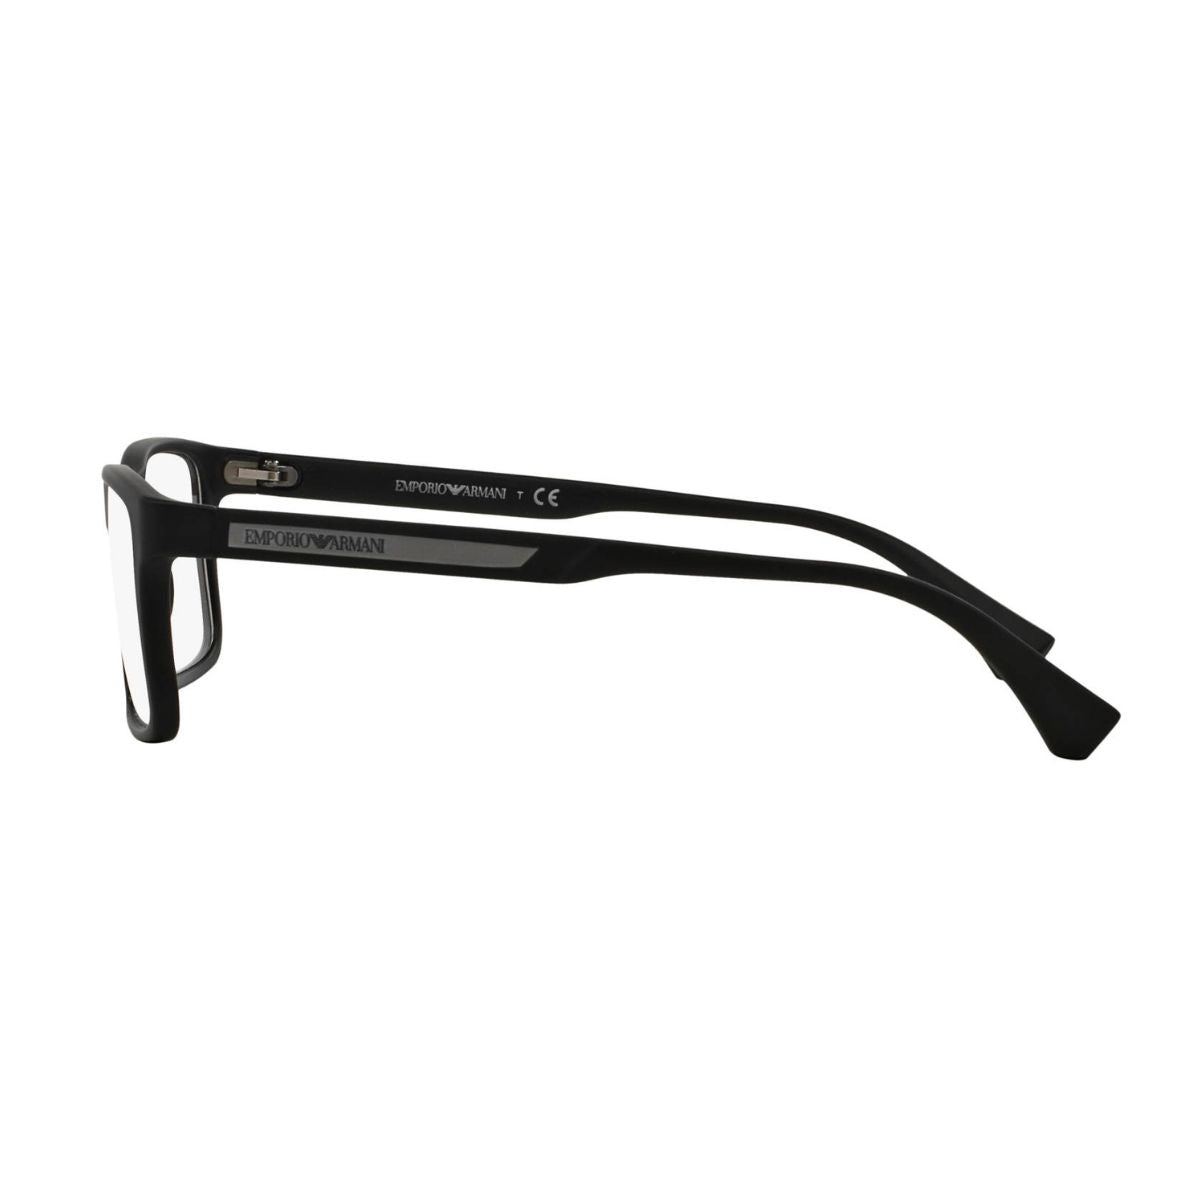 "Emporio Armani 3038 5063 Eye Spectacle Frame For Men's Online At Optorium"